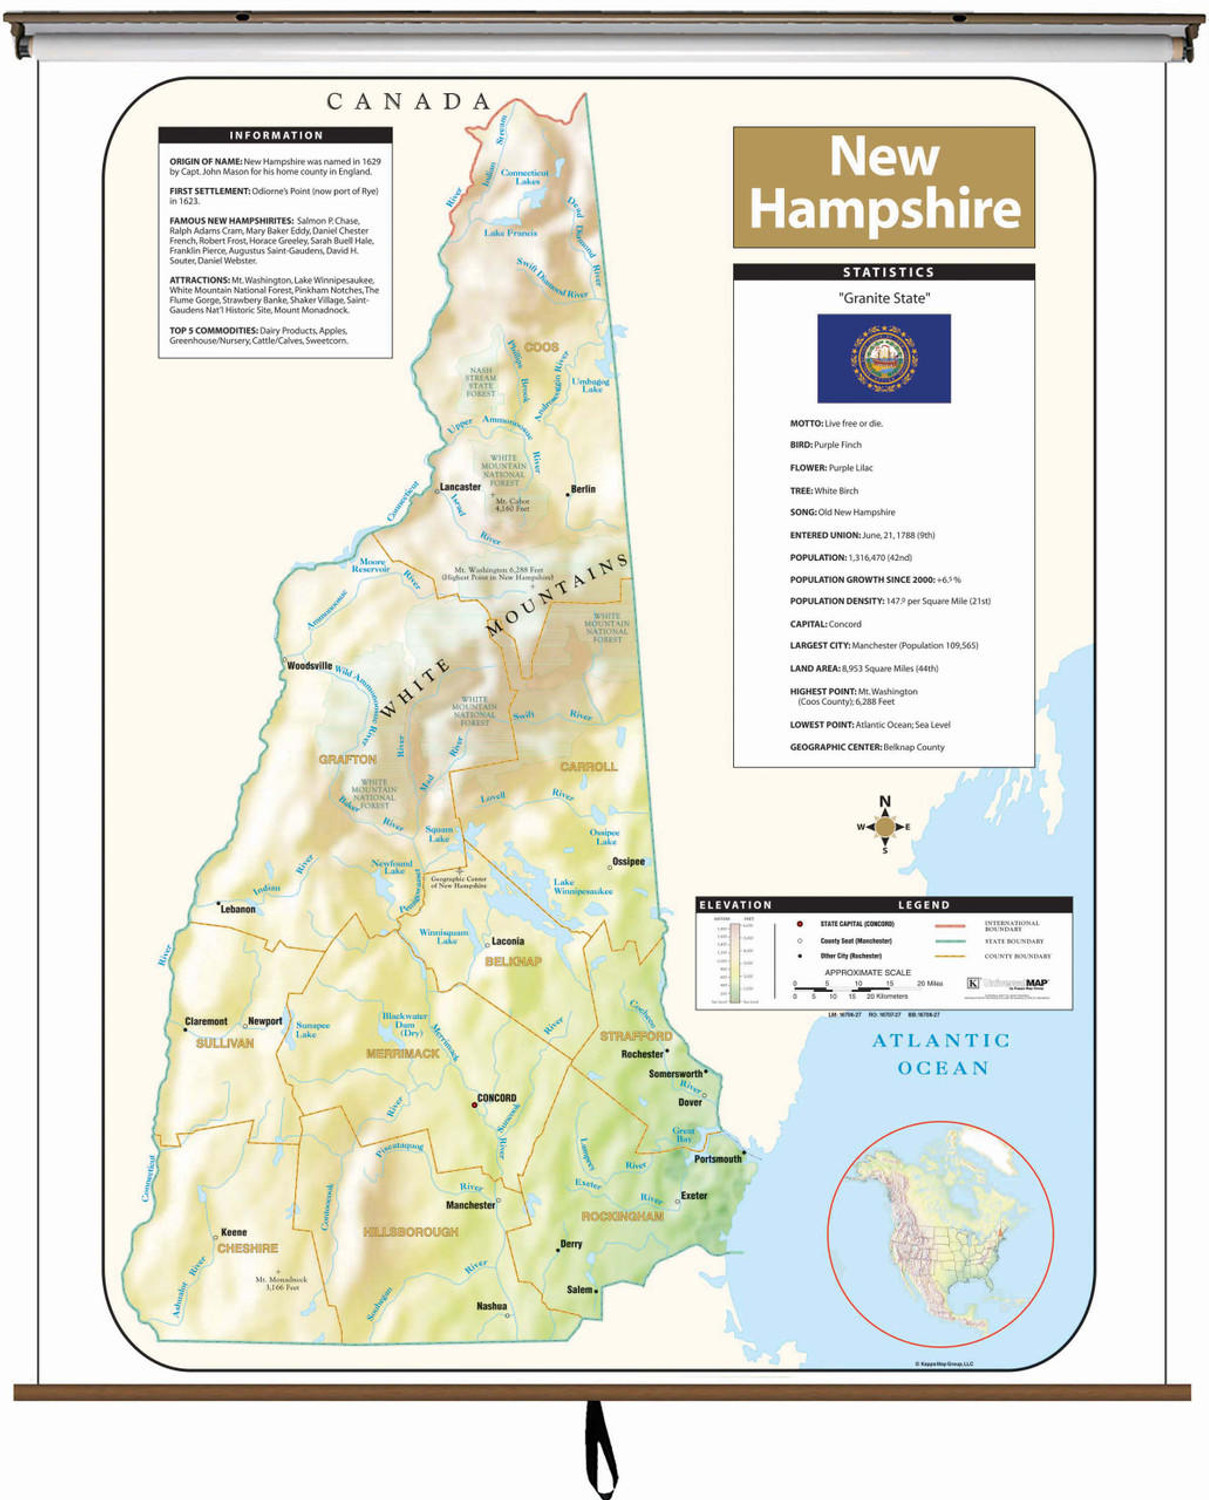 New Hampshire Large Shaded Relief Map on Spring Roller from Kappa Maps, image 1, World Maps Online